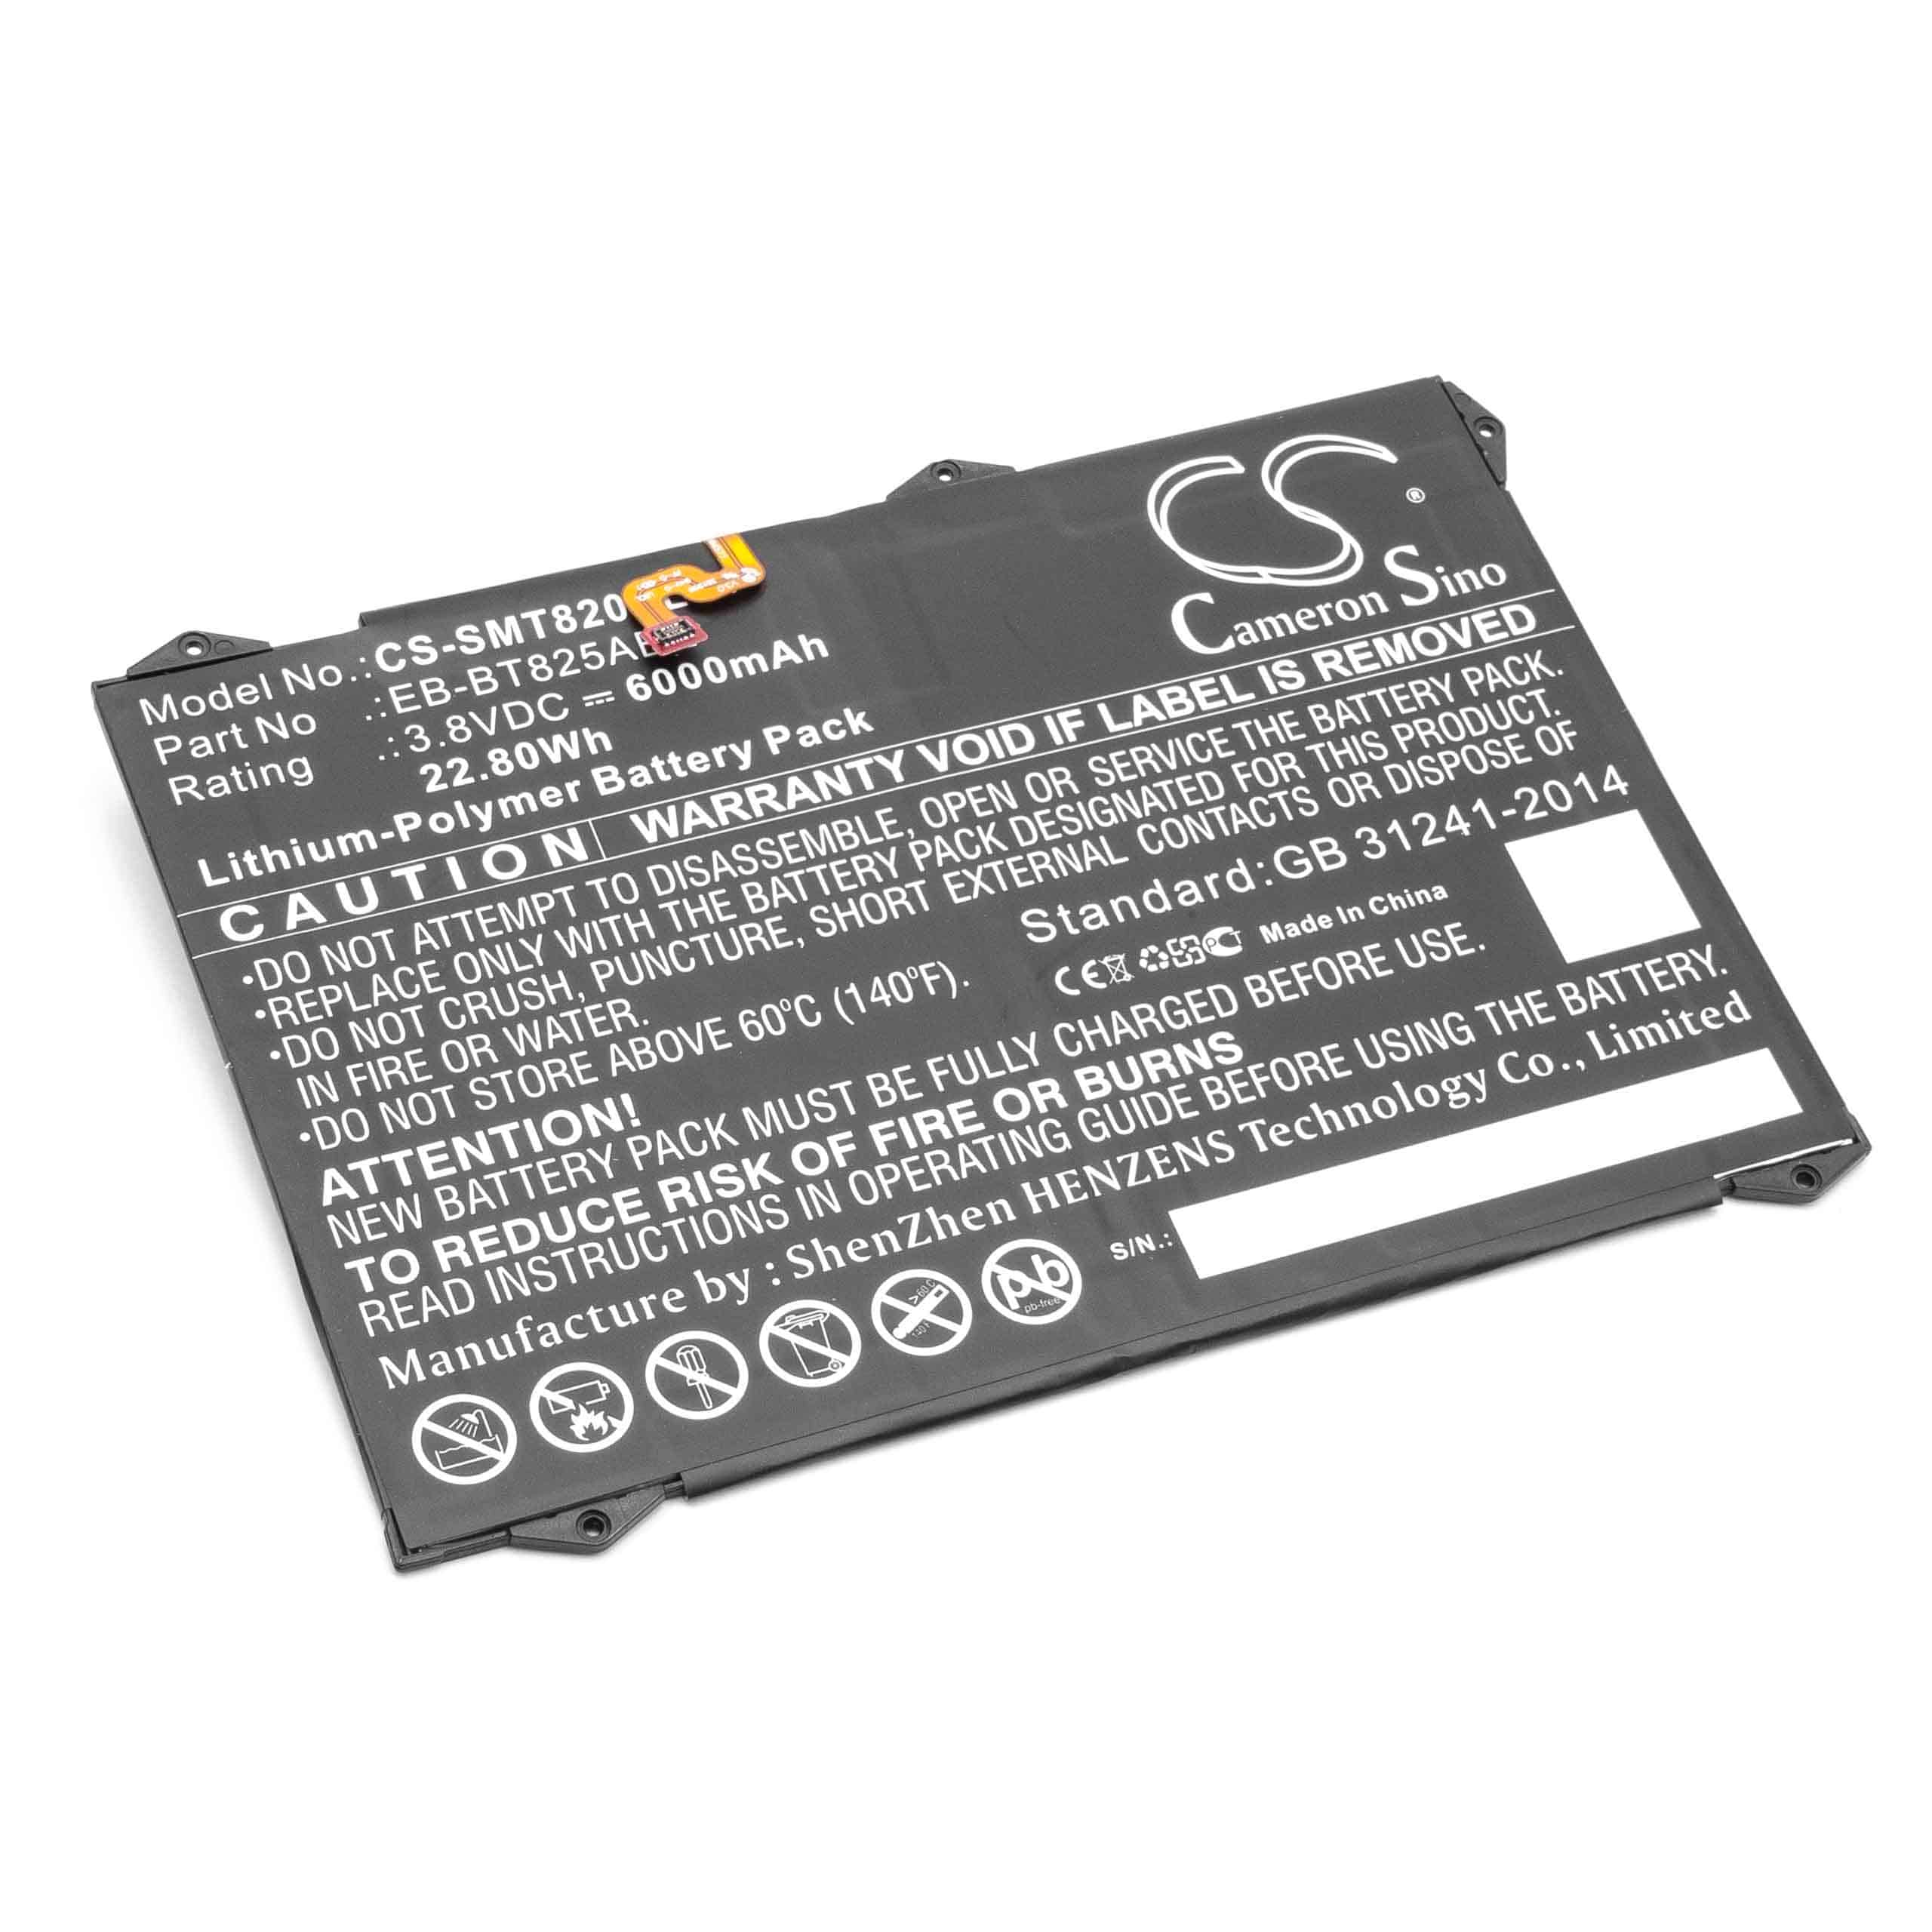 Tablet Battery Replacement for Samsung GH43-04702A, EB-BT825ABE, EB-BT825ABA - 6000mAh 3.8V Li-polymer